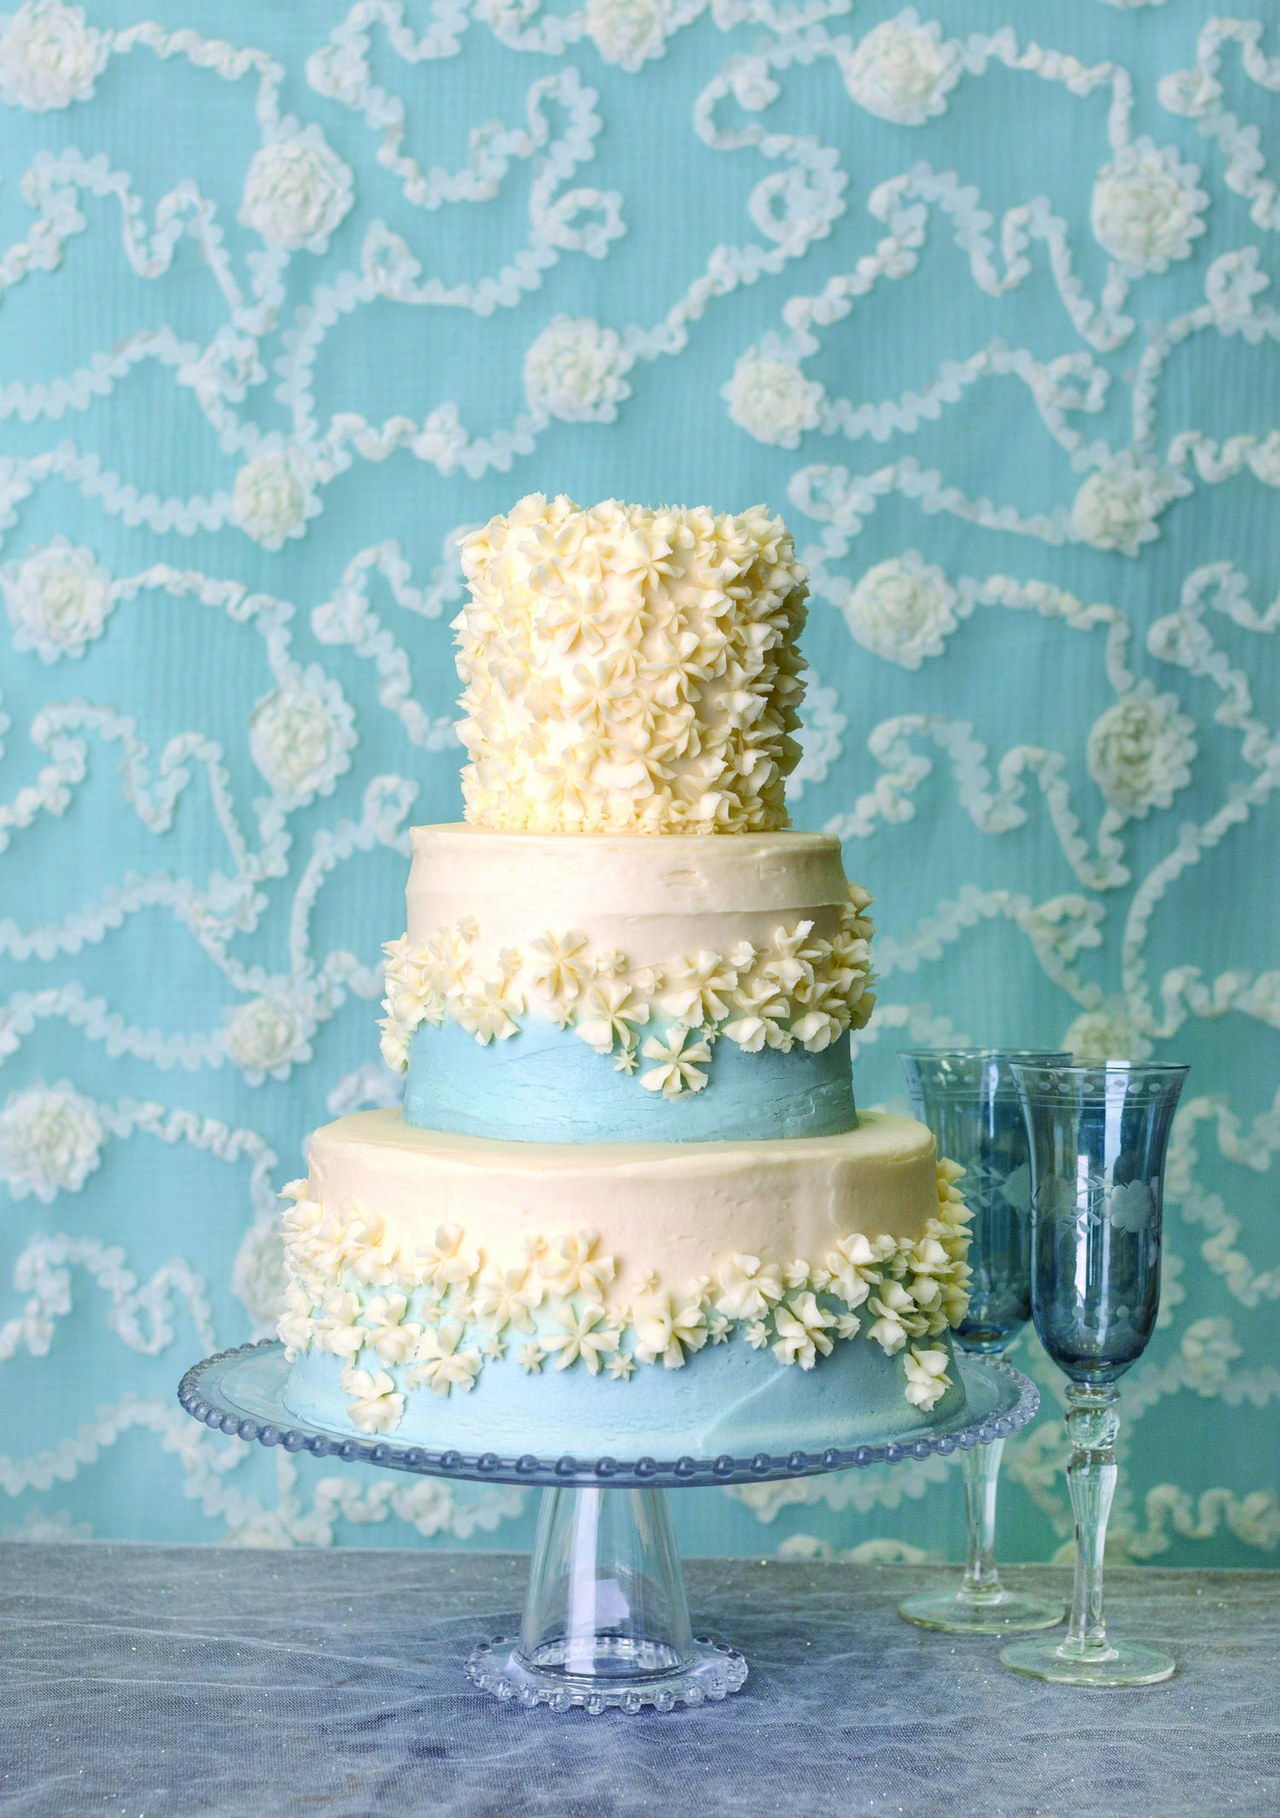 13 pictures of wedding cakes magnolia bakery 0328